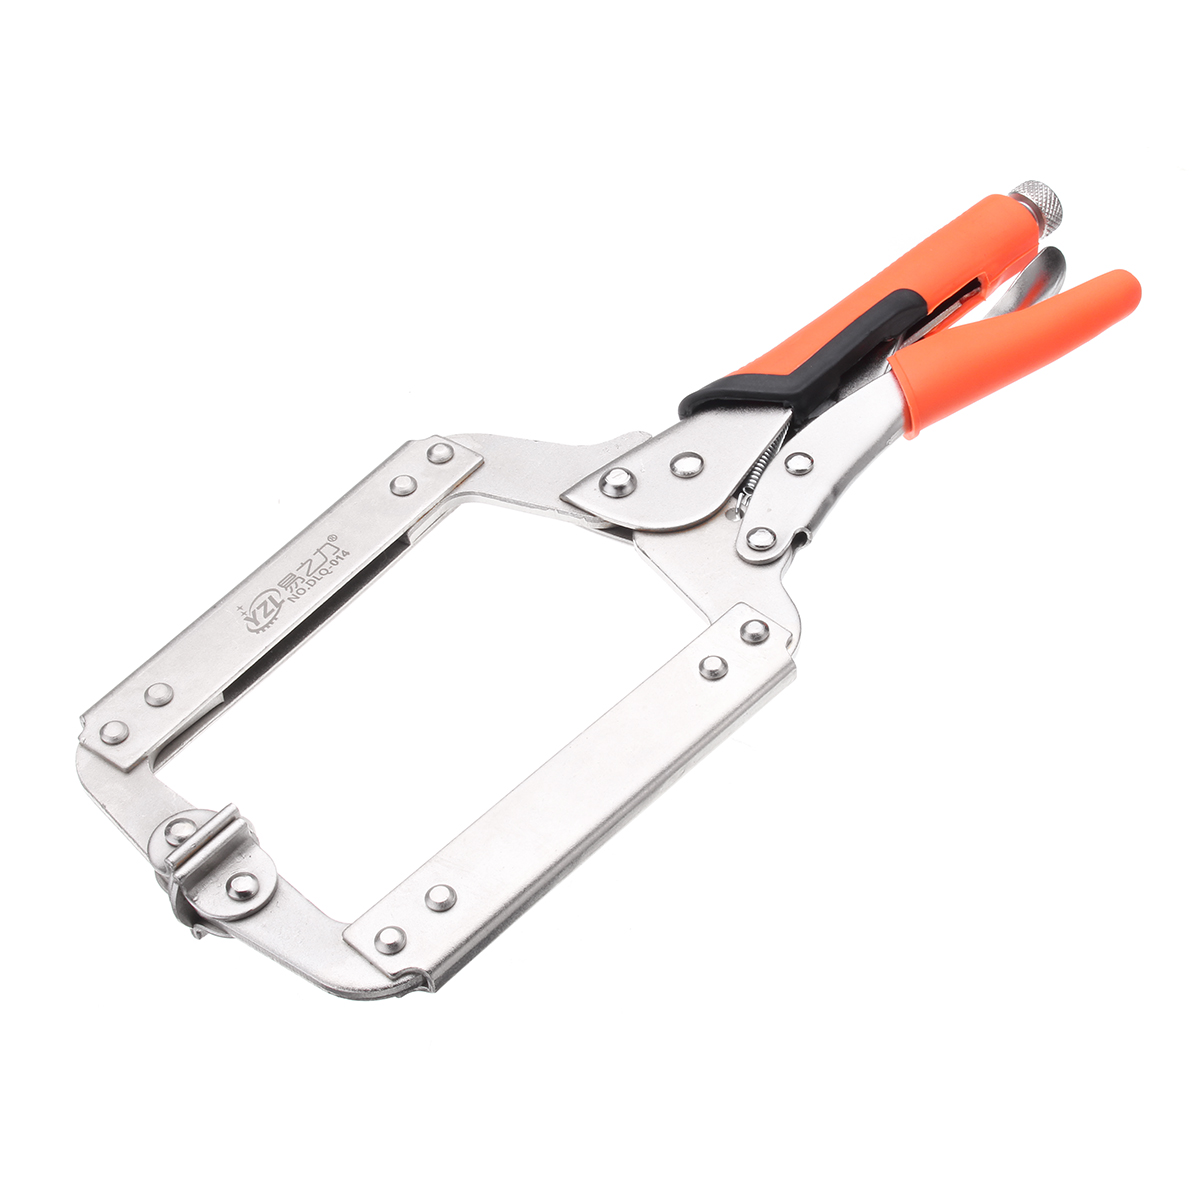 6/9/11/14/18'' C Bracket Vise-Grip Welding Quick Pliers Woodworking DIY Tool Multi-function Pliers Wood Fixed Face Clamp Locator